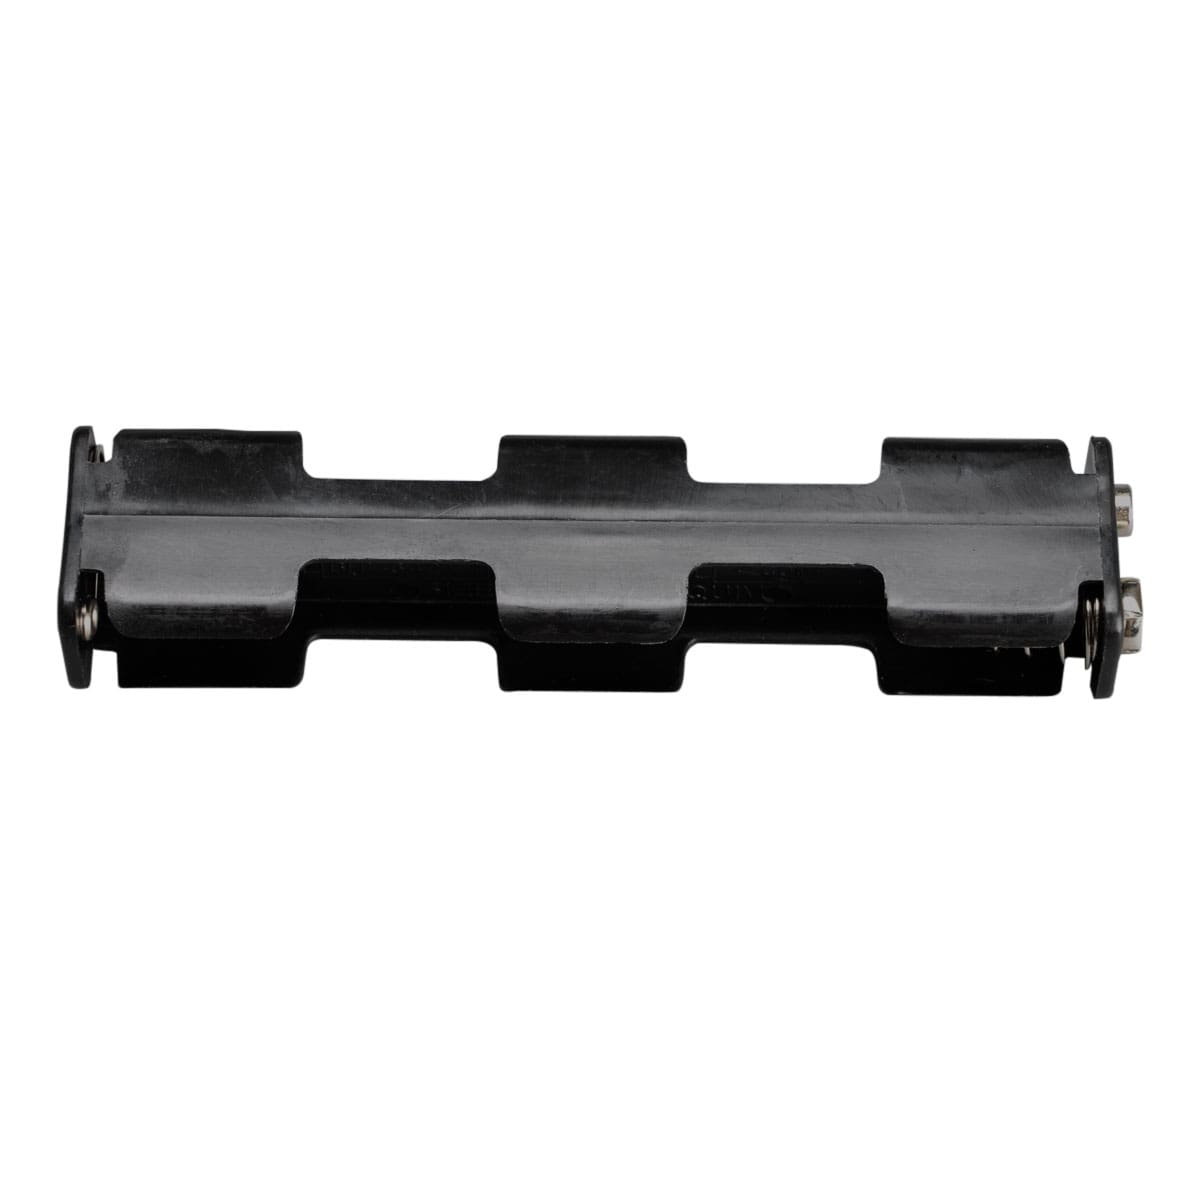 Replacement AA battery holder for AT models